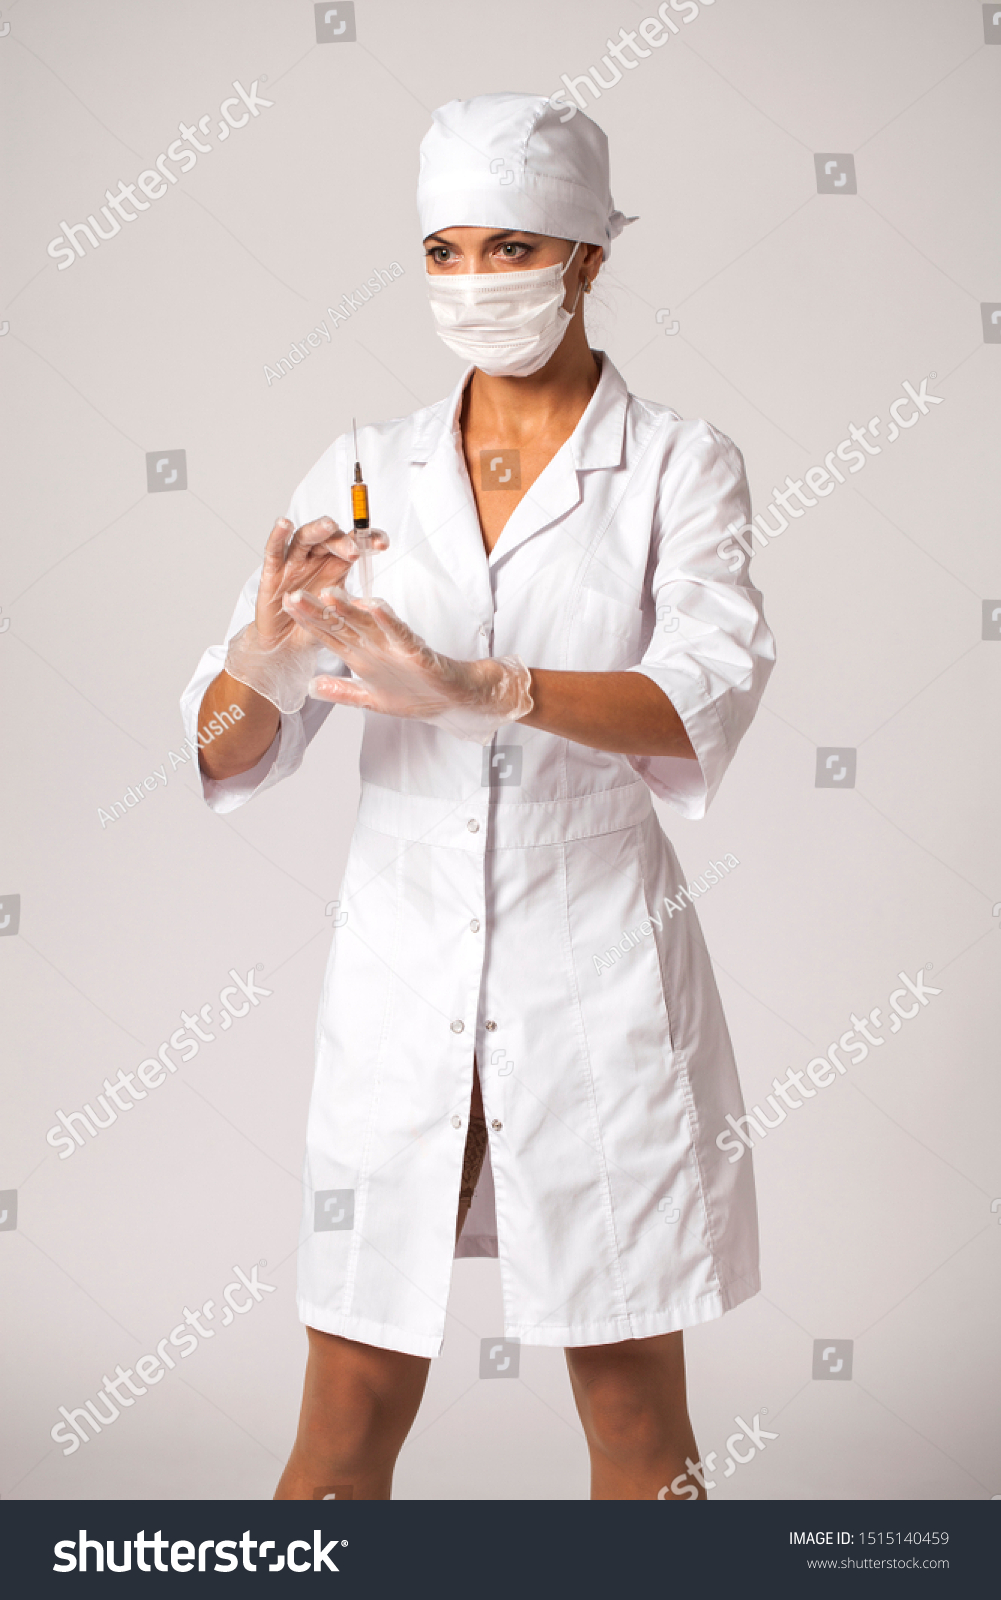 The doctor in a white coat holds a syringe in his hands